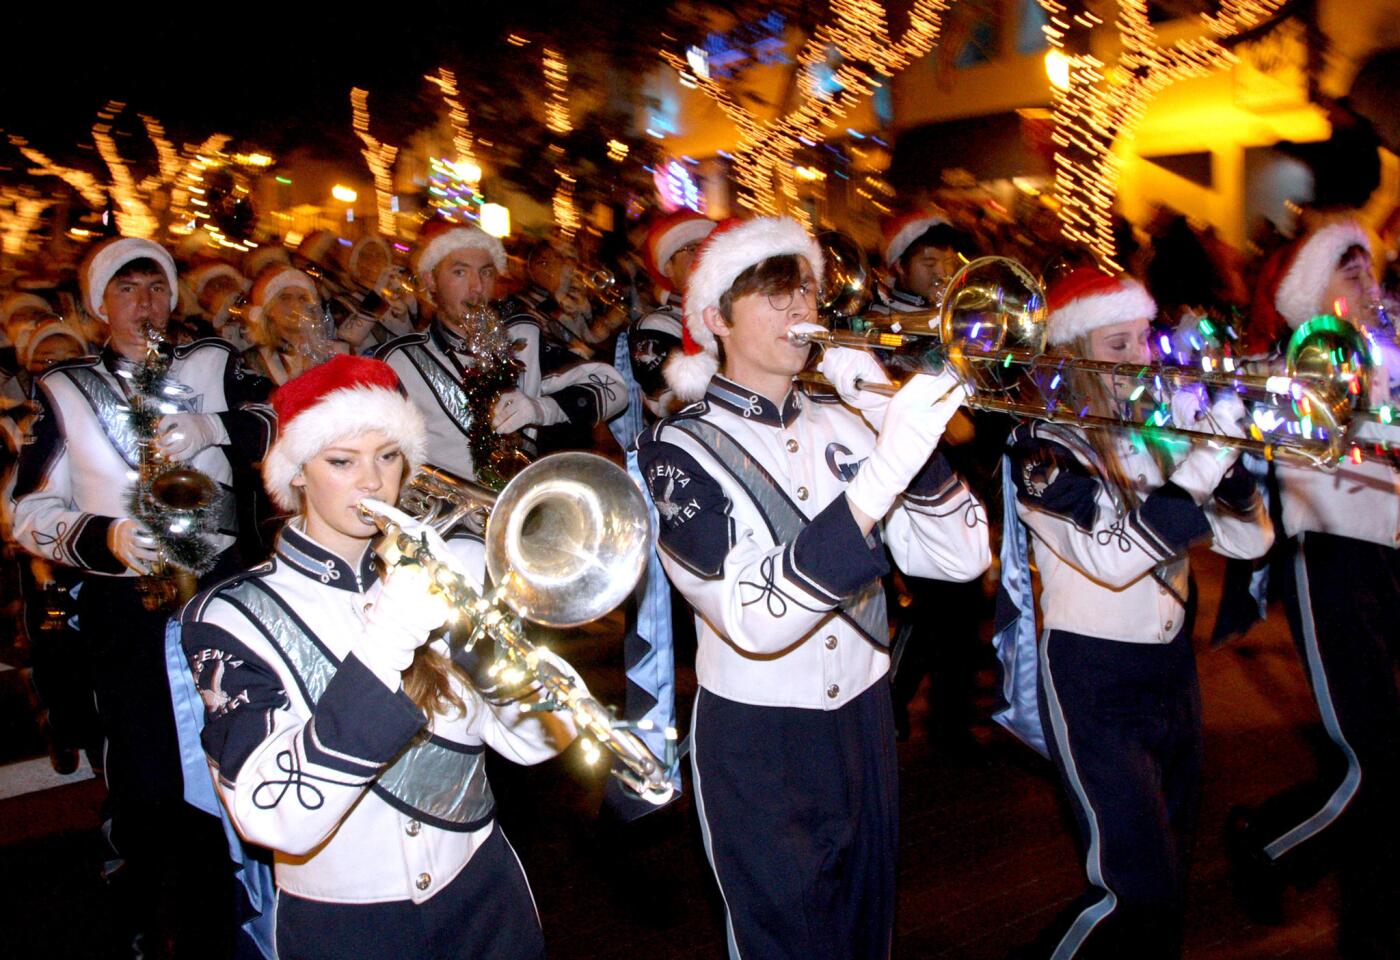 The Crescenta Valley High School band performs for the large crowds gathered on Honolulu Ave. for the annual Montrose-Glendale Christmas Parade in Montrose on Saturday, December 5, 2015. Santa Claus flew above the crowds with the help of the Glendale police dept. helicopter.